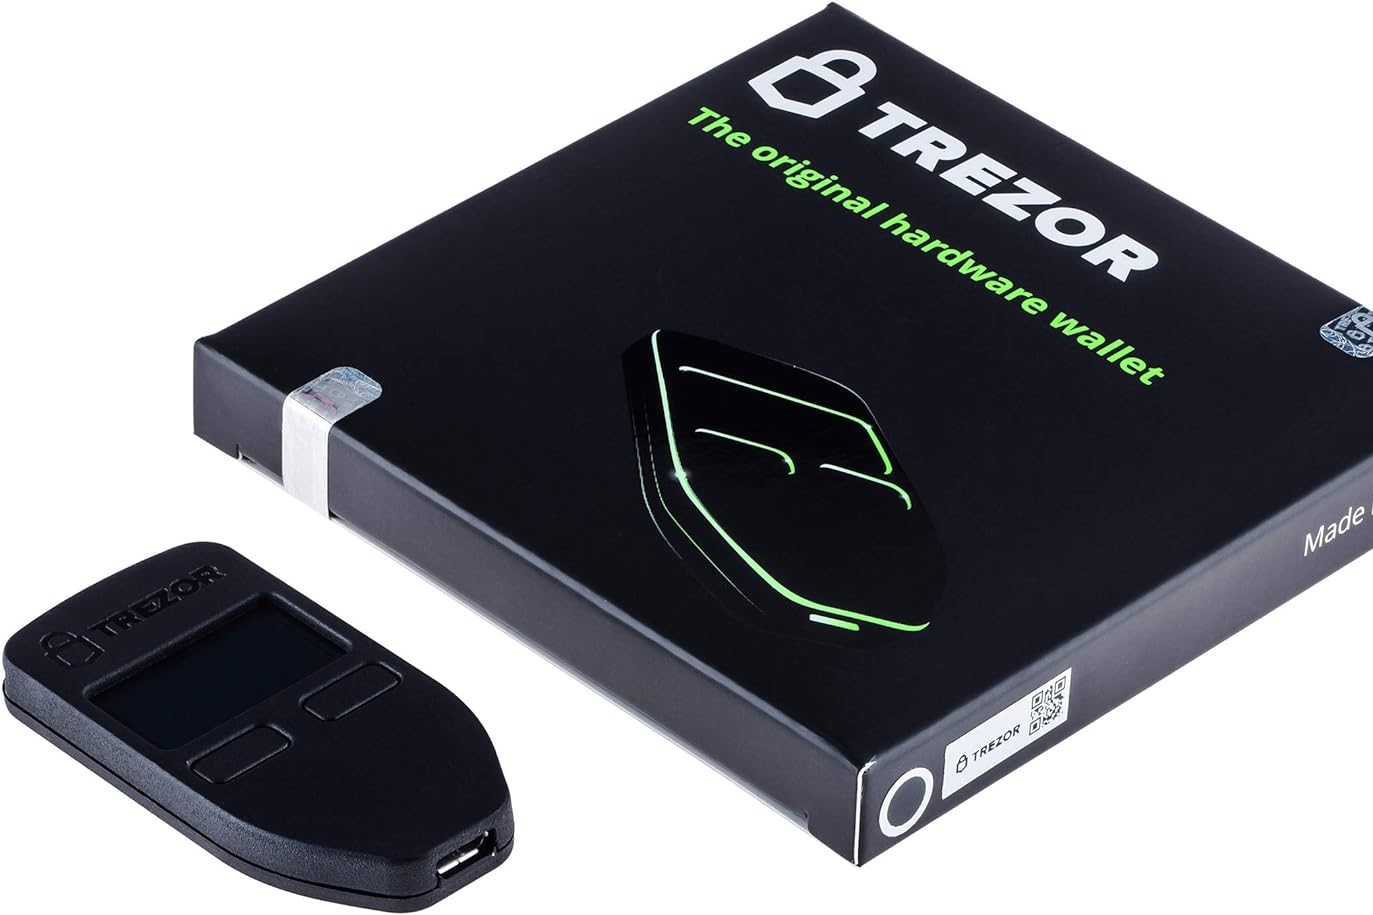 Why Does Trezor Cost More On Amazon